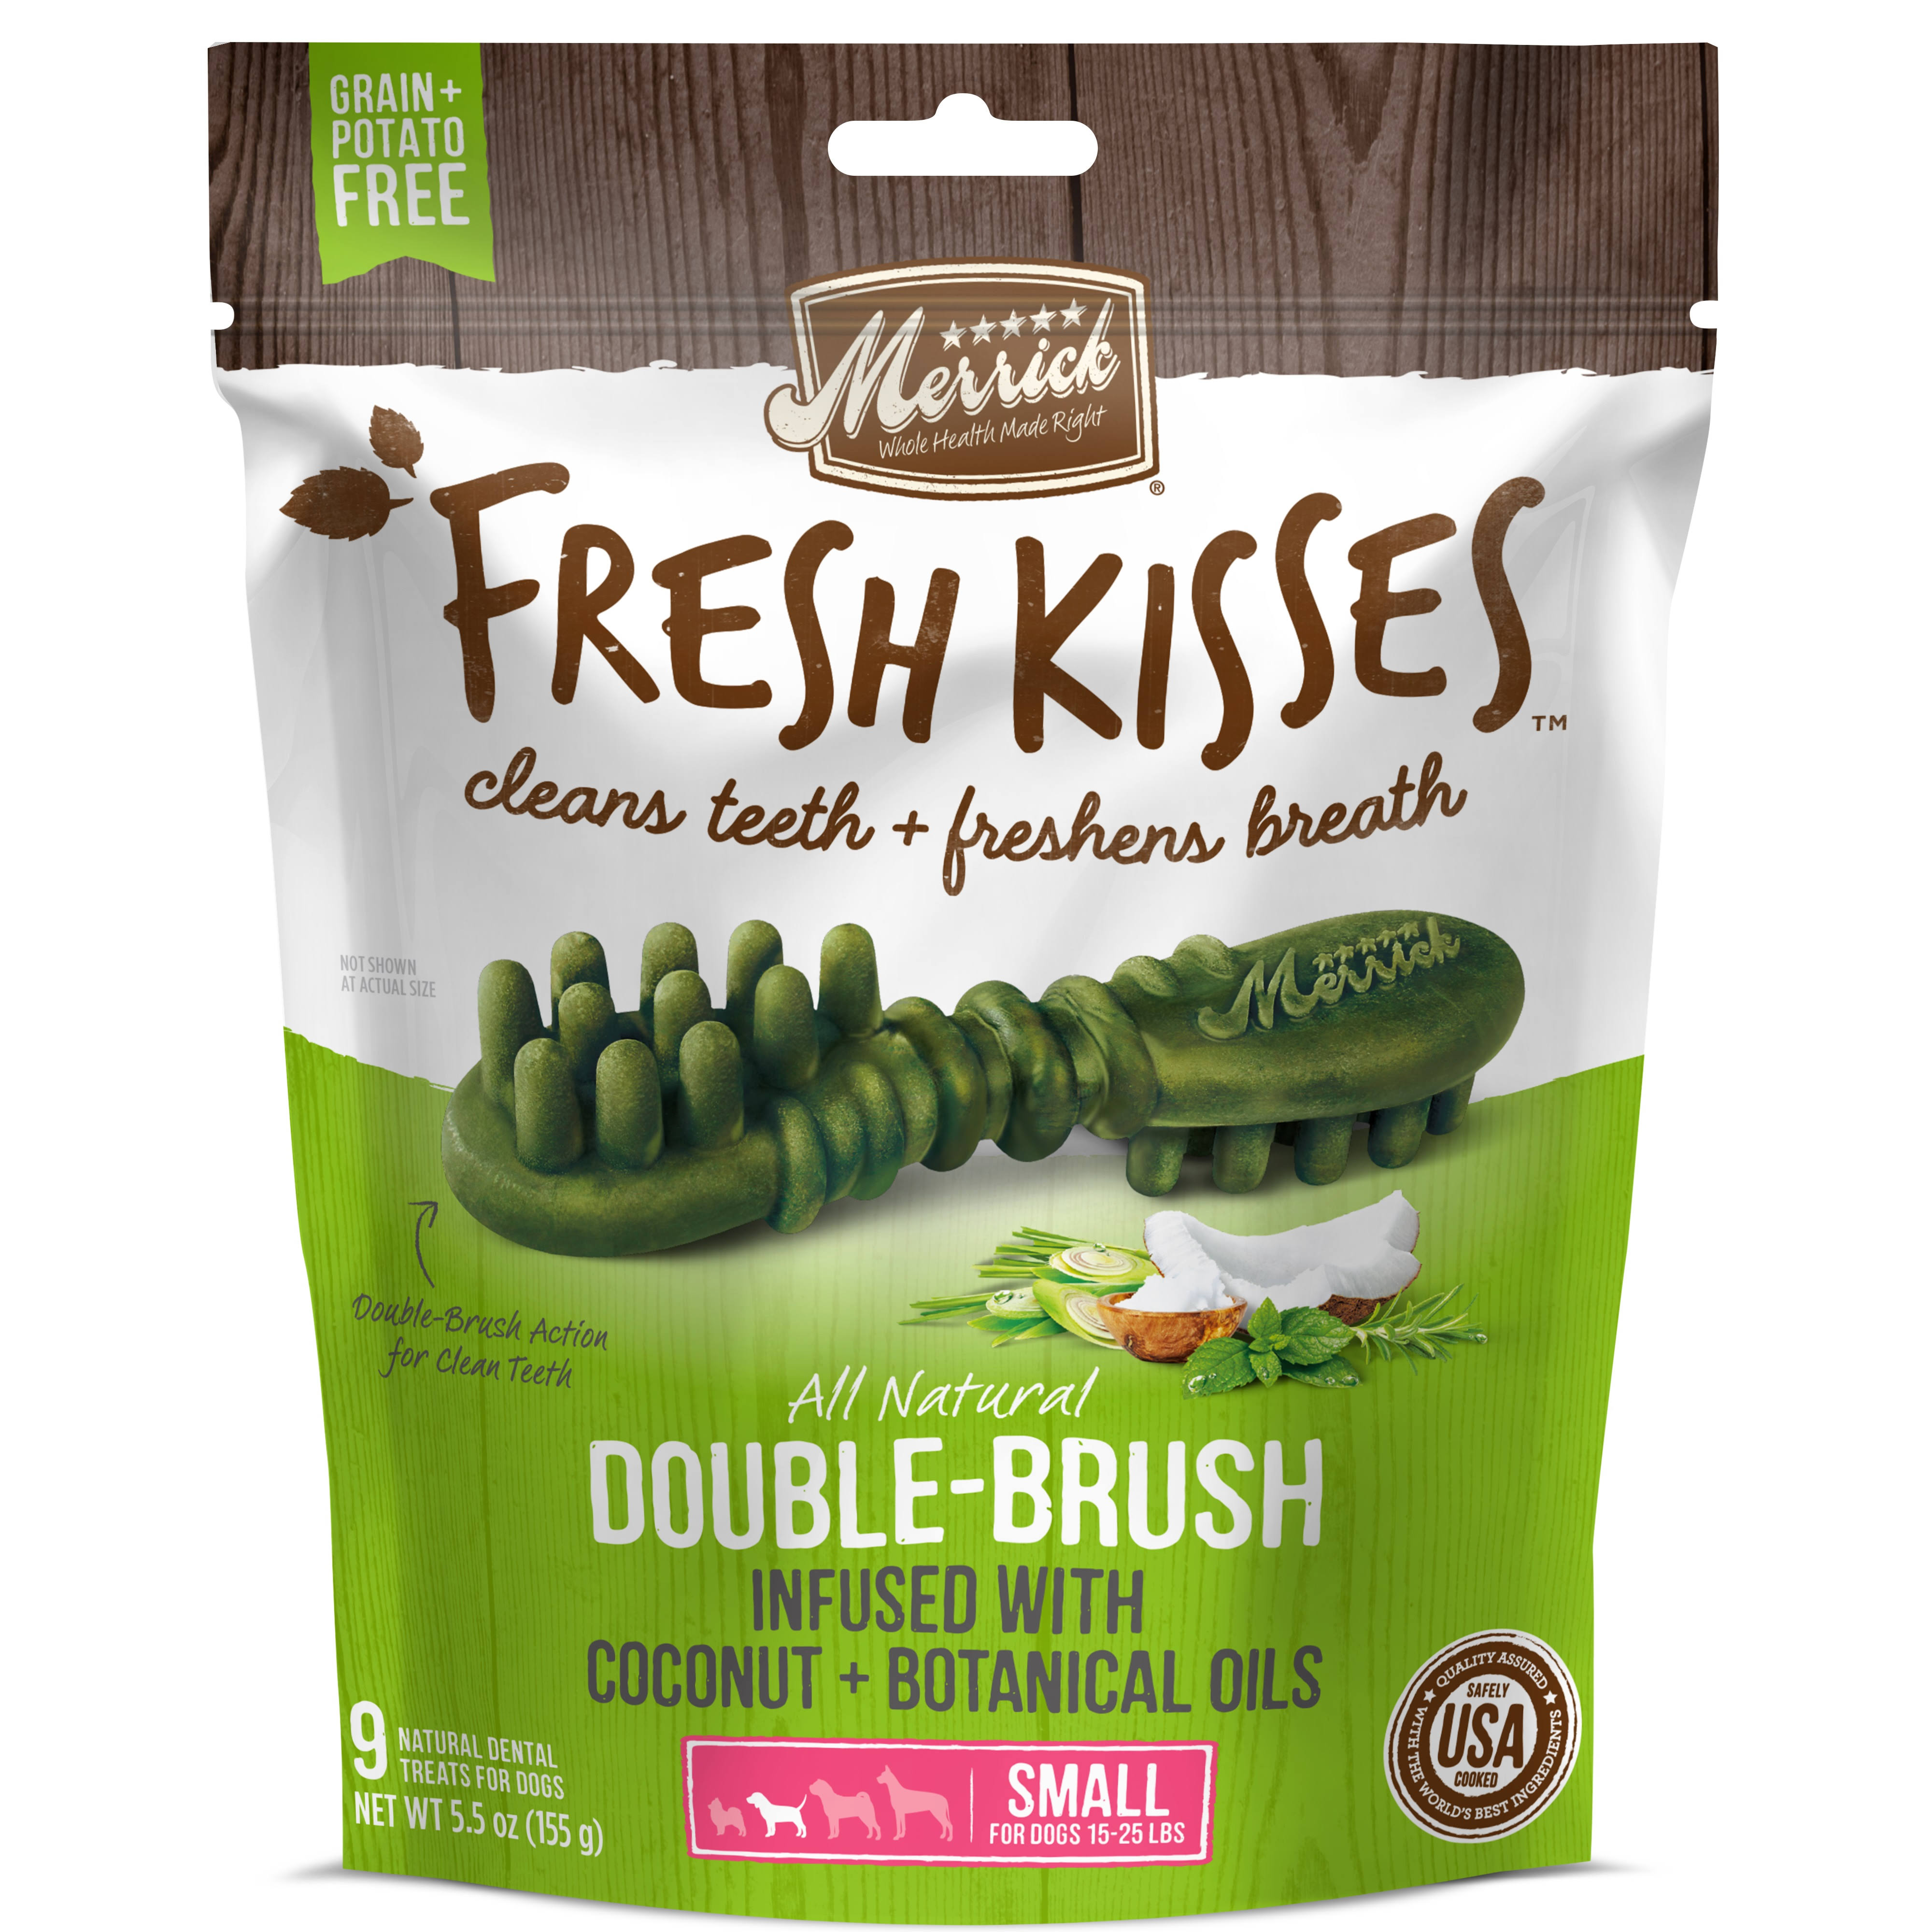 Merrick Fresh Kisses Oral Care Dental Dog Treats For Small Dogs 15-25 lbs